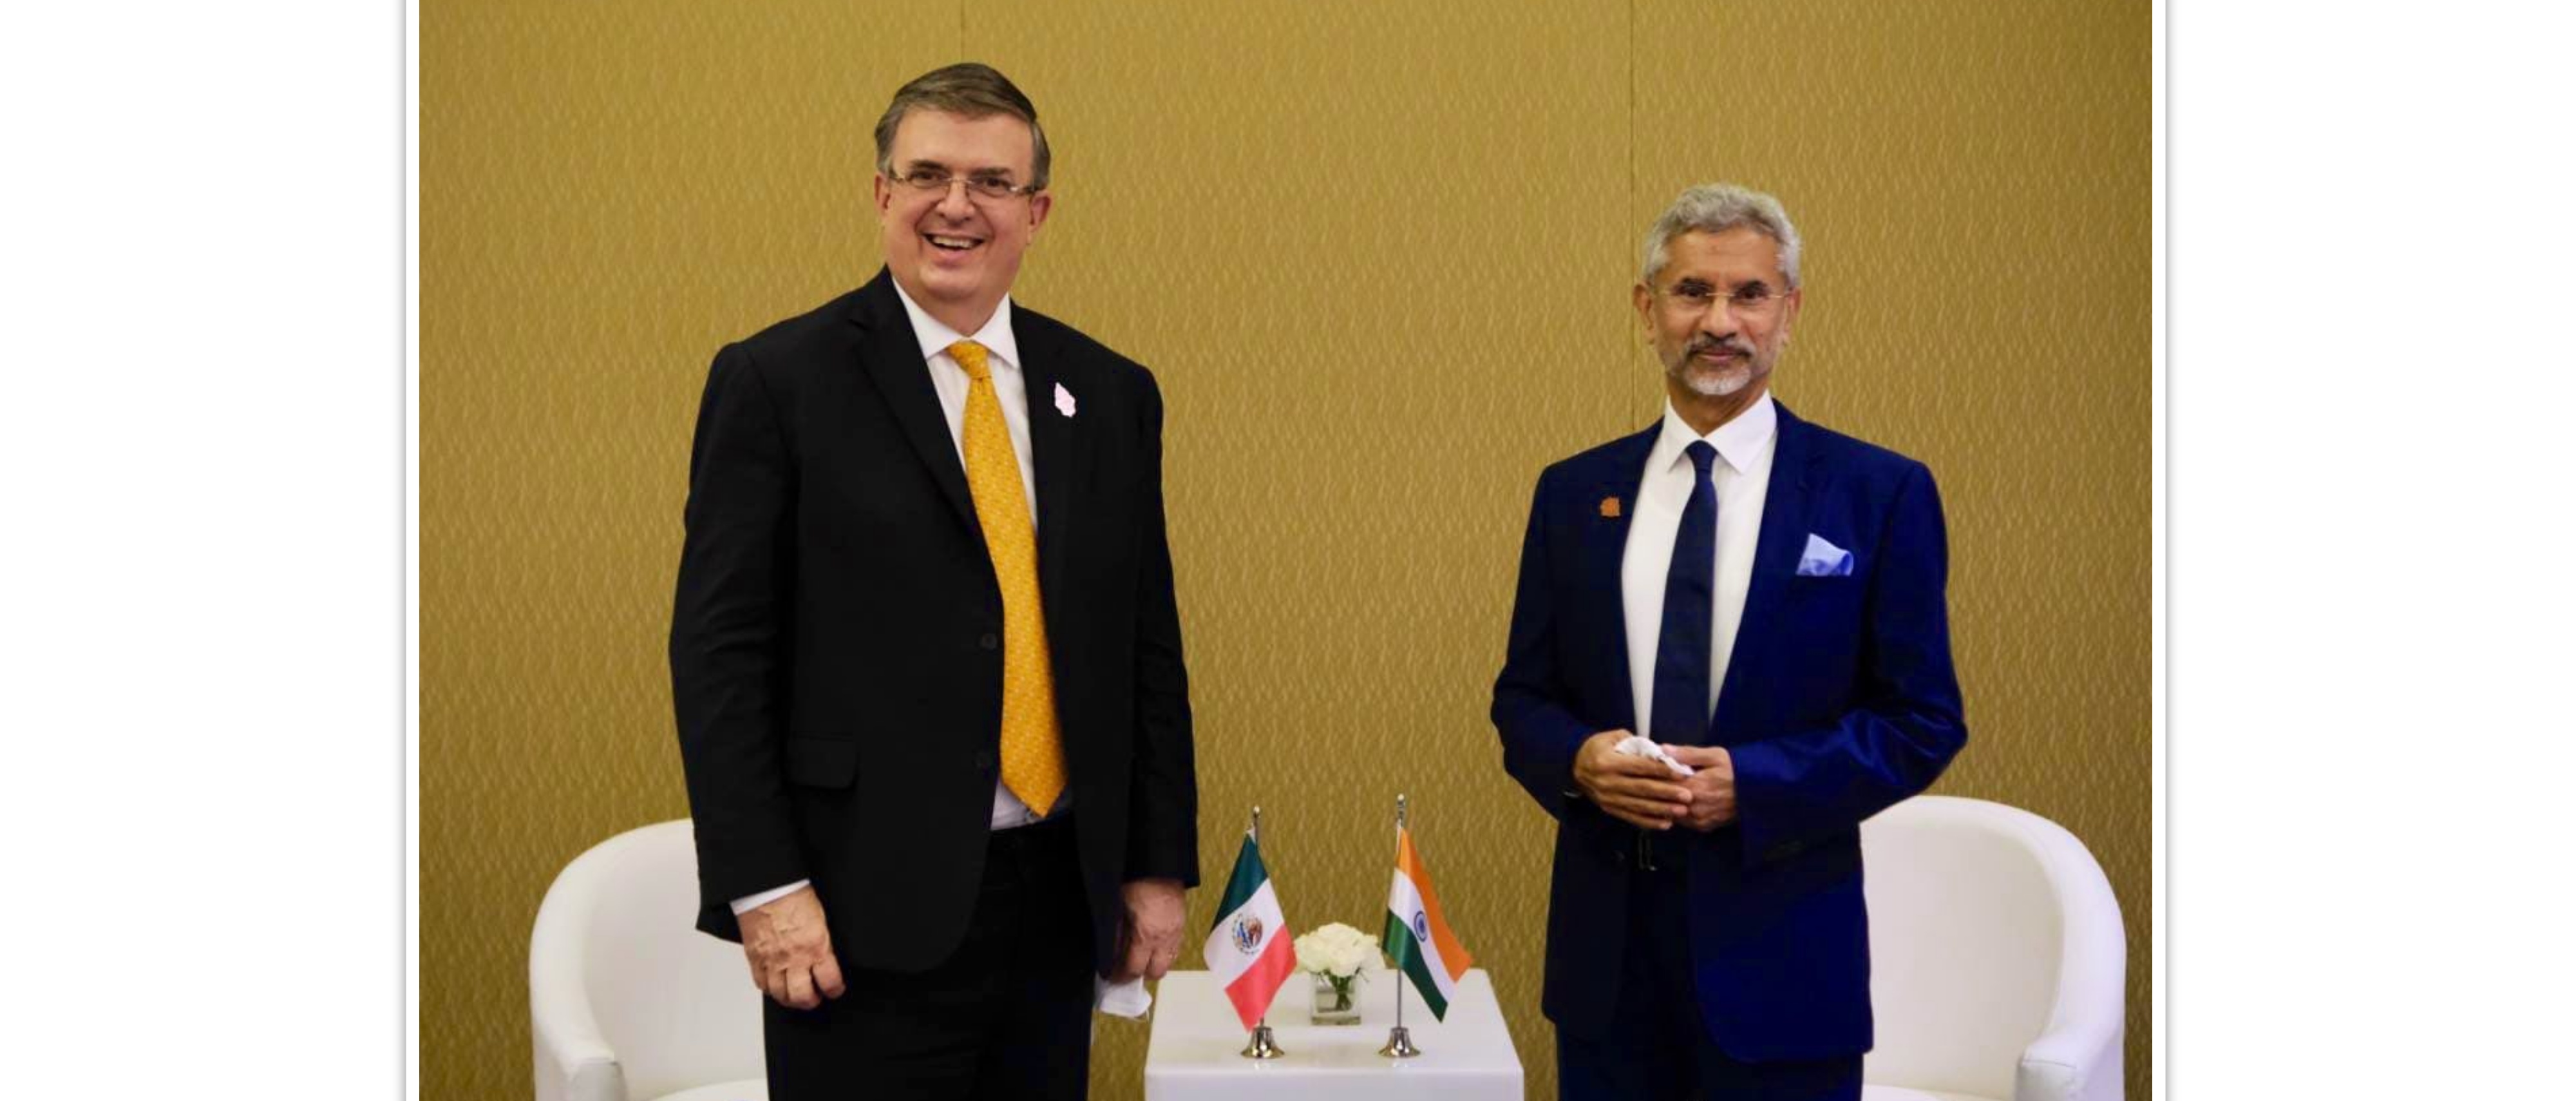  <div style="fcolor: #fff; font-weight: 600; font-size: 1.5em;">
<p style="font-size: 13.8px;">Hon'ble External Affairs Minister of India Dr. S.Jaishankar held a meeting with Hon'ble Foreign Minister of Mexico H.E. Mr. Marcelo Ebrard on the sidelines of G20 Foreign Minister's Meeting.

Discussion focussed upon expanded cooperation in space, agriculture, pharmaceuticals, innovation and growing trade between India and Mexico.

India & Mexico coordination in multilateral forums including G20 remains strong.

<br /><span style="text-align: center;">07 July 2022</span></p>
</div>